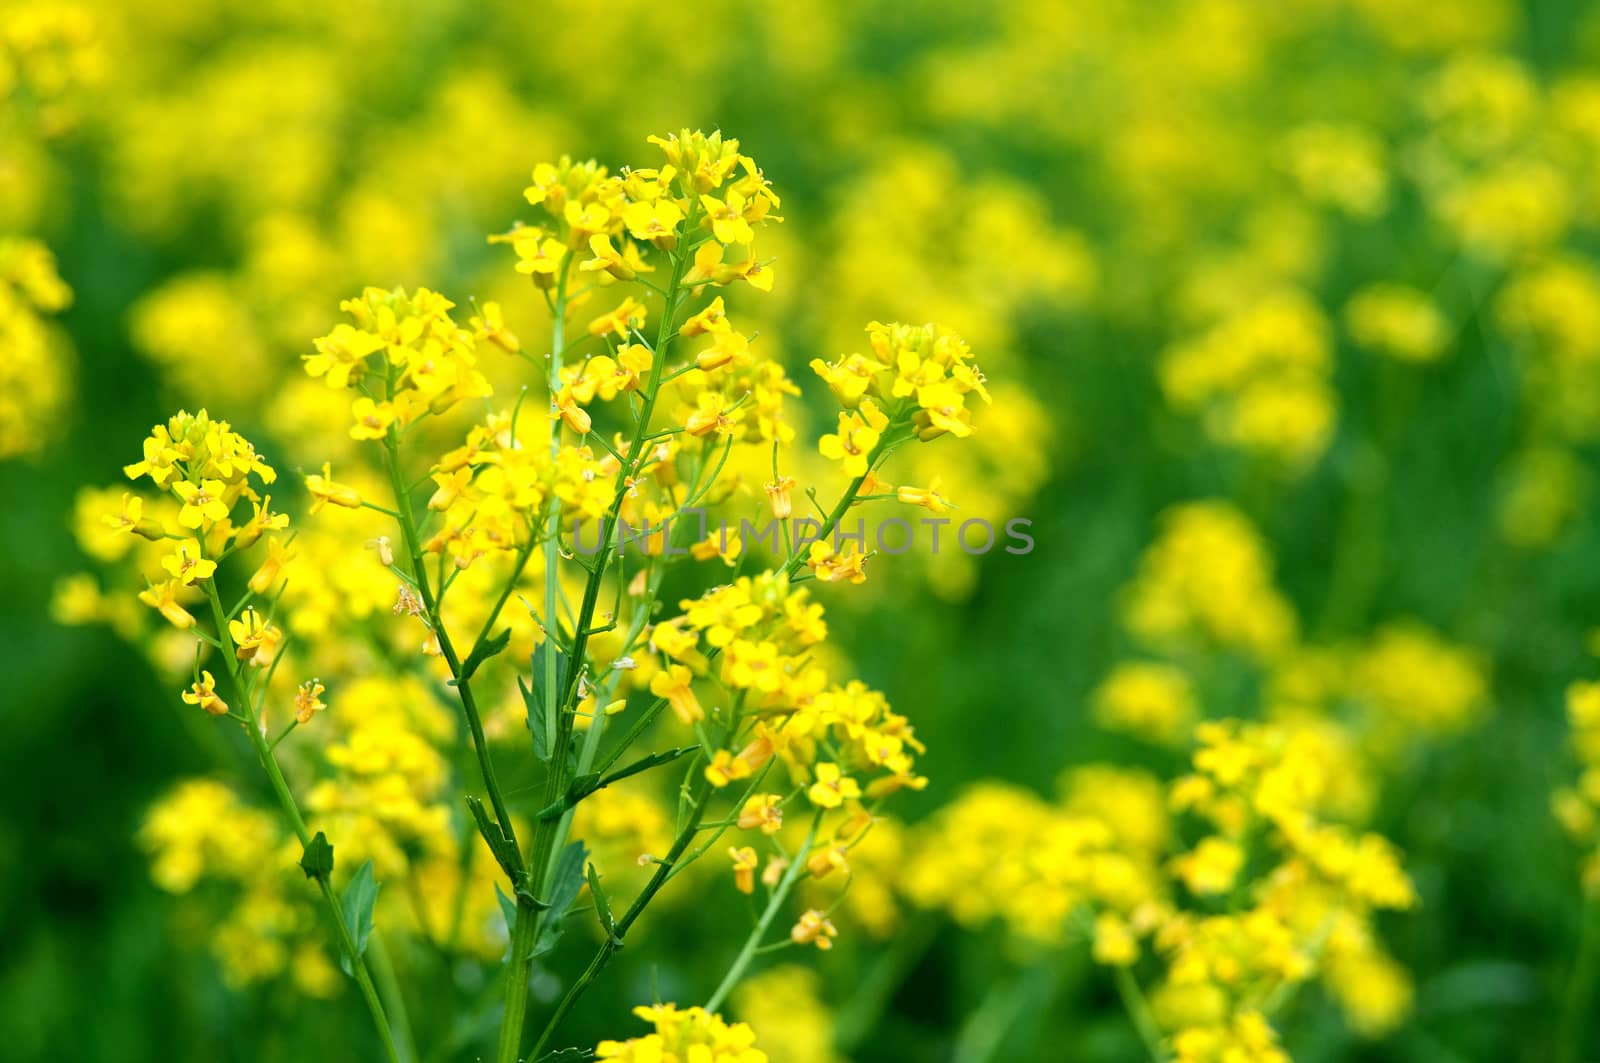 Colorful fresh yellow flowers of bittercress (Barbarea vulgaris) with close-up, Sergiev Posad, Moscow region, Russia